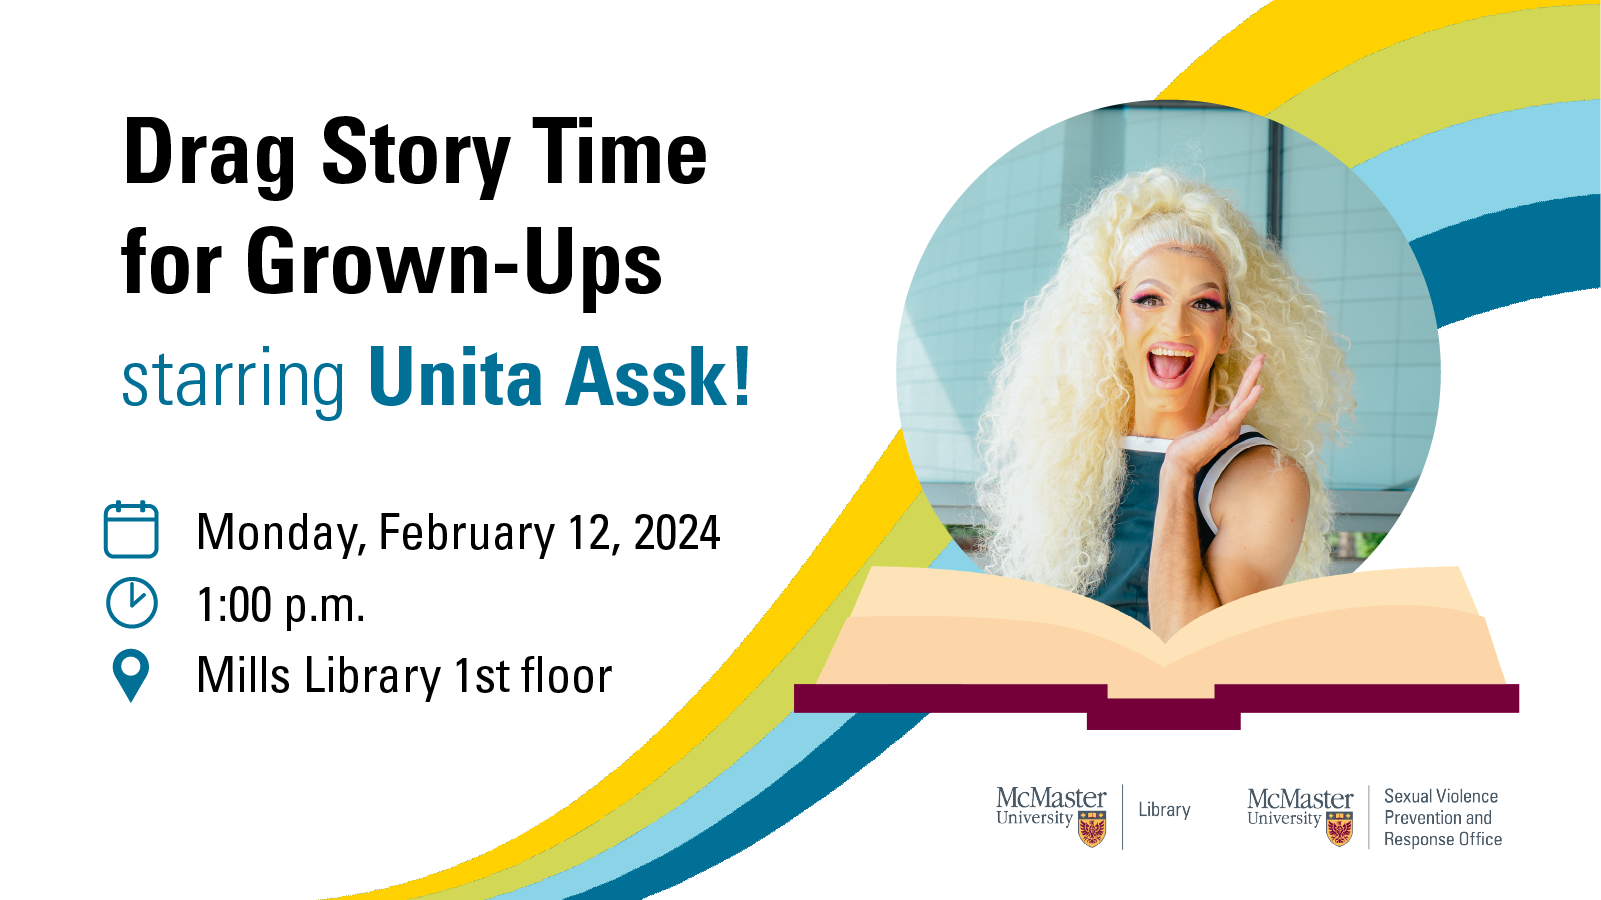 Drag Story Time for Grown-Ups starring Unita Assk! Monday, February 12, 2024, 1:00pm, Mills Library 1st floor Photo Unita Assk and a book